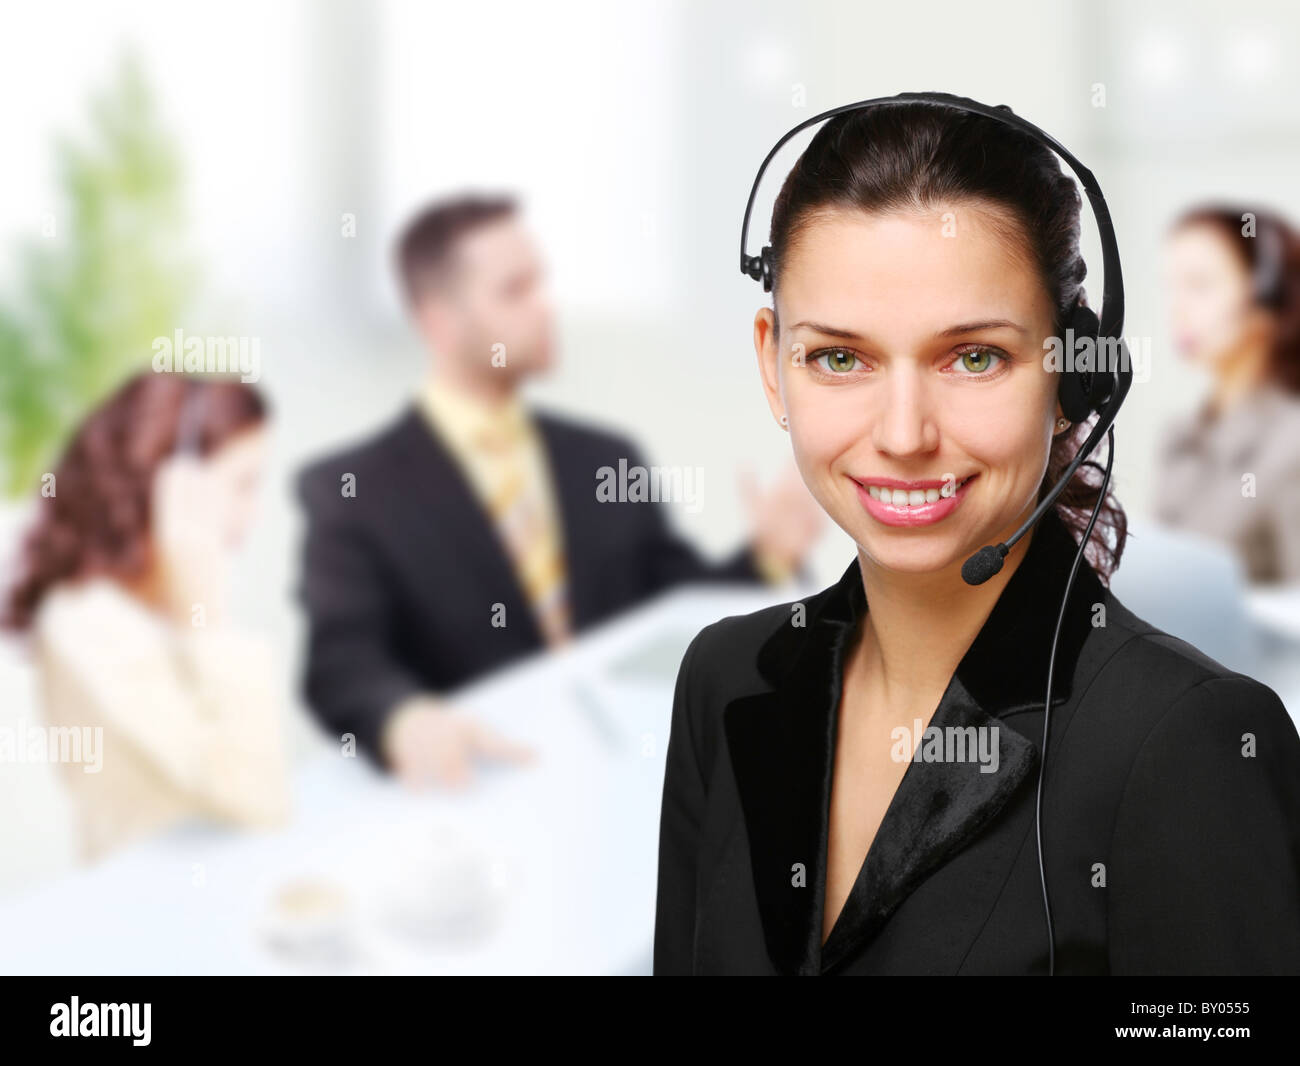 Customer support operator woman smiling at an office Stock Photo